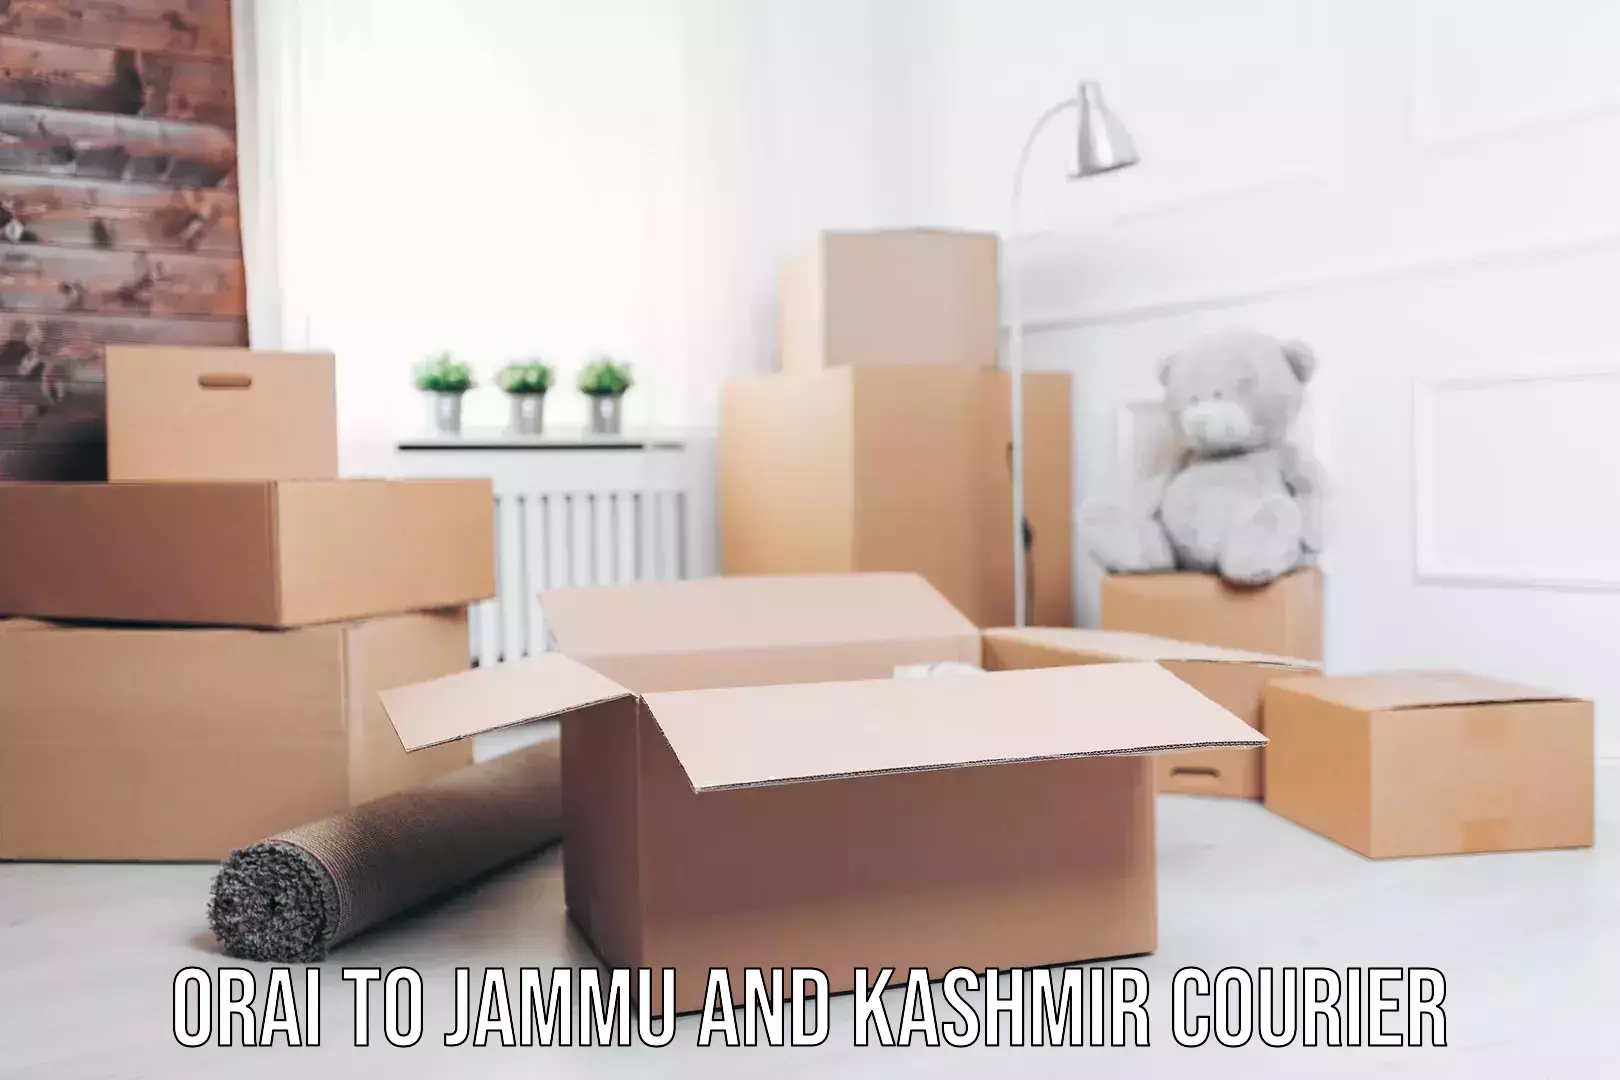 Trusted relocation services in Orai to Jammu and Kashmir